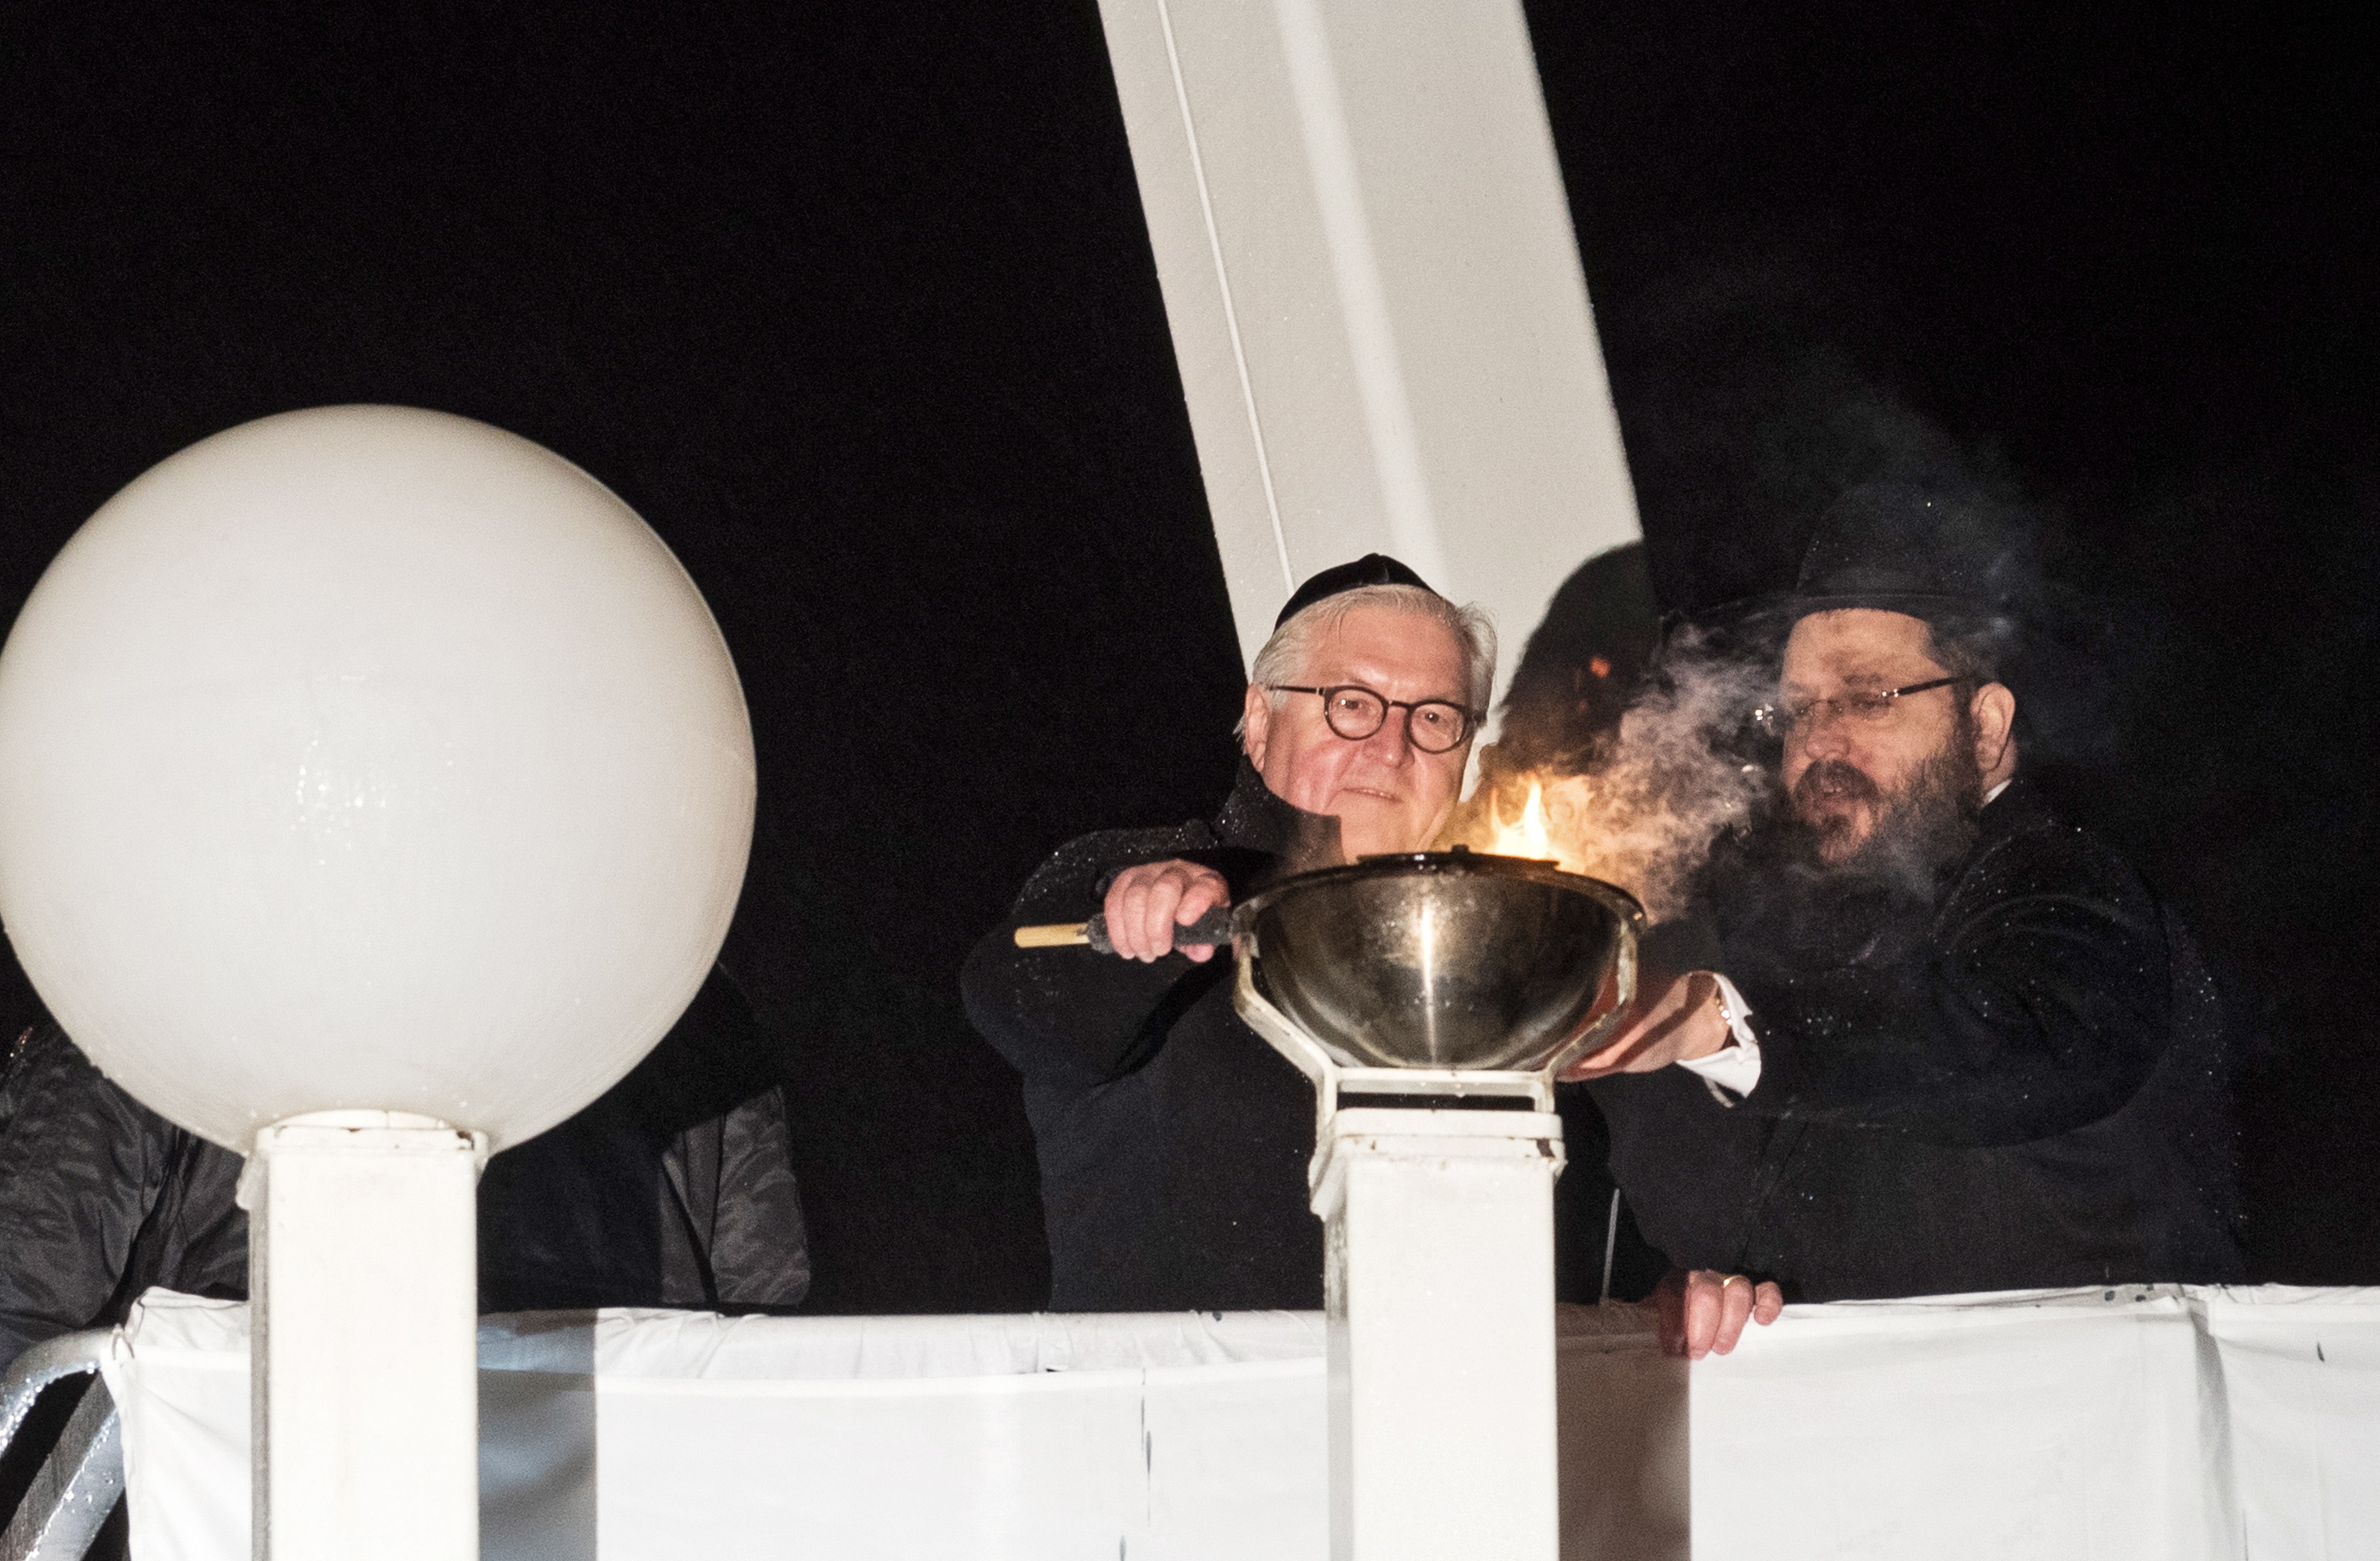 epa07204535 German President Frank-Walter Steinmeier (L) and Rabbi of Jewish Community in Berlin Yehuda Teichtal light on the Hanukkah Menorah at the Pariser Platz in front of the Brandenburg Gate in Berlin, Germany, 02 December 2018. Hanukkah, also known as the 'Festival of Lights', is one of the most important Jewish holidays and is celebrated by Jews worldwide.  EPA/MARKUS HEINE